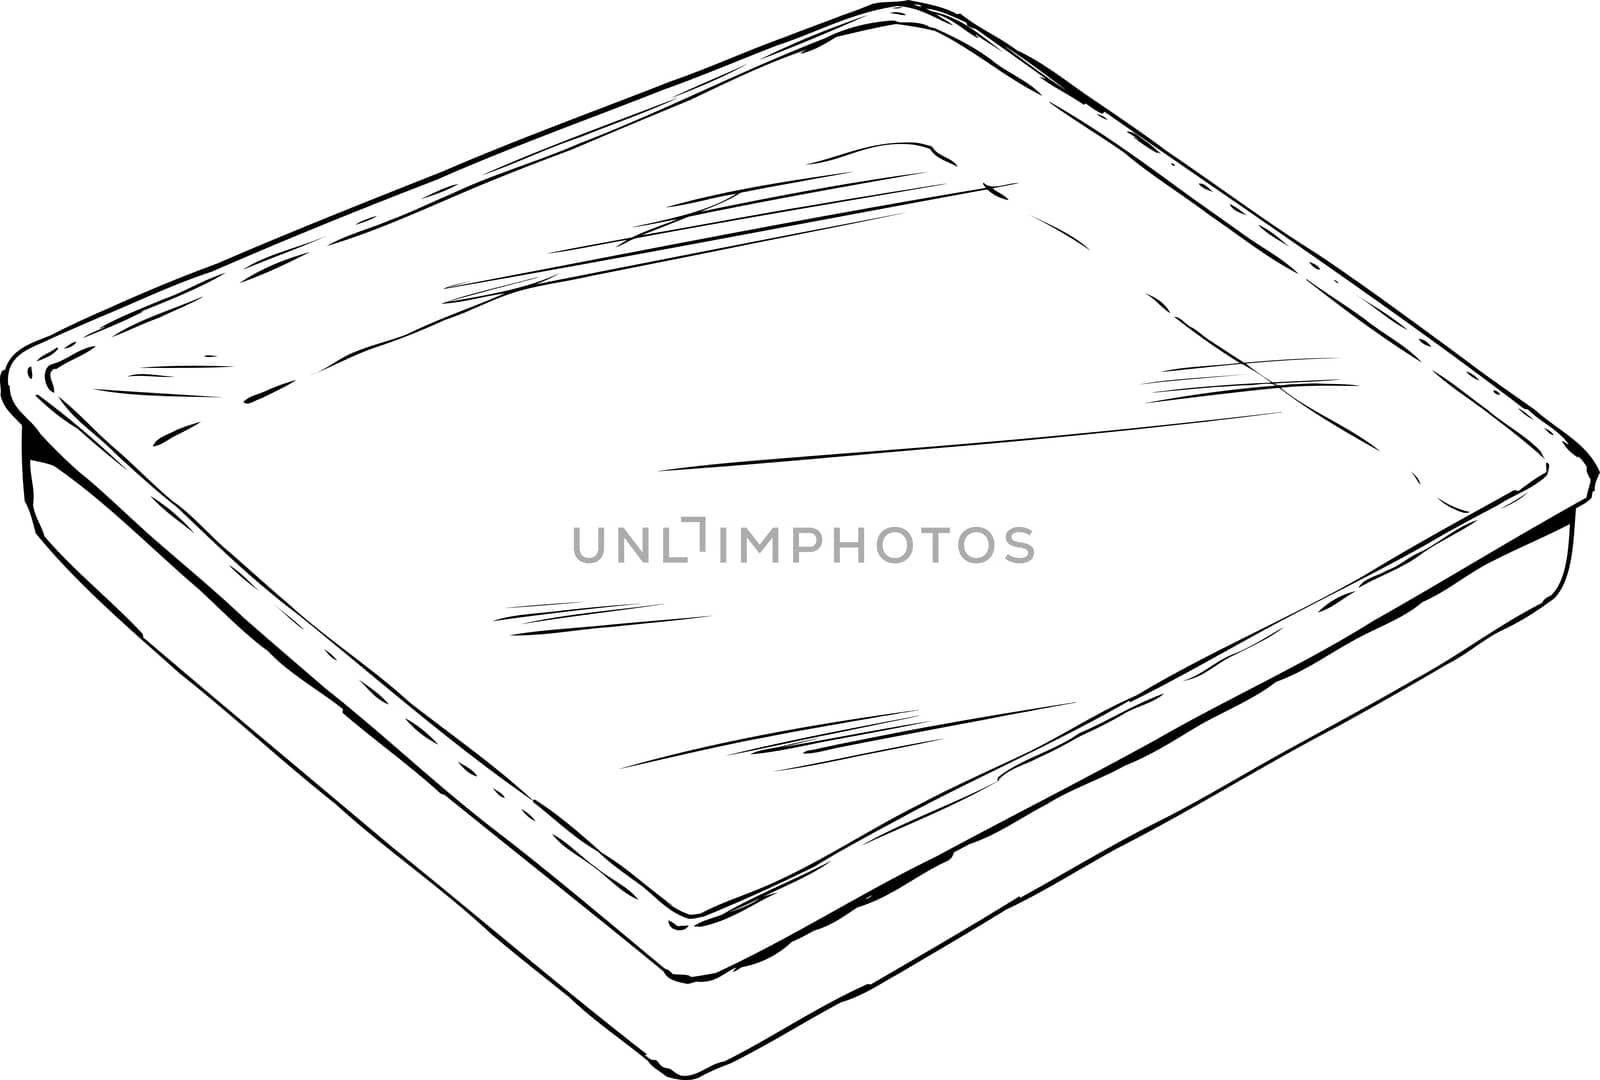 Outline of empty rectangular tray or pan with plastic wrap on top